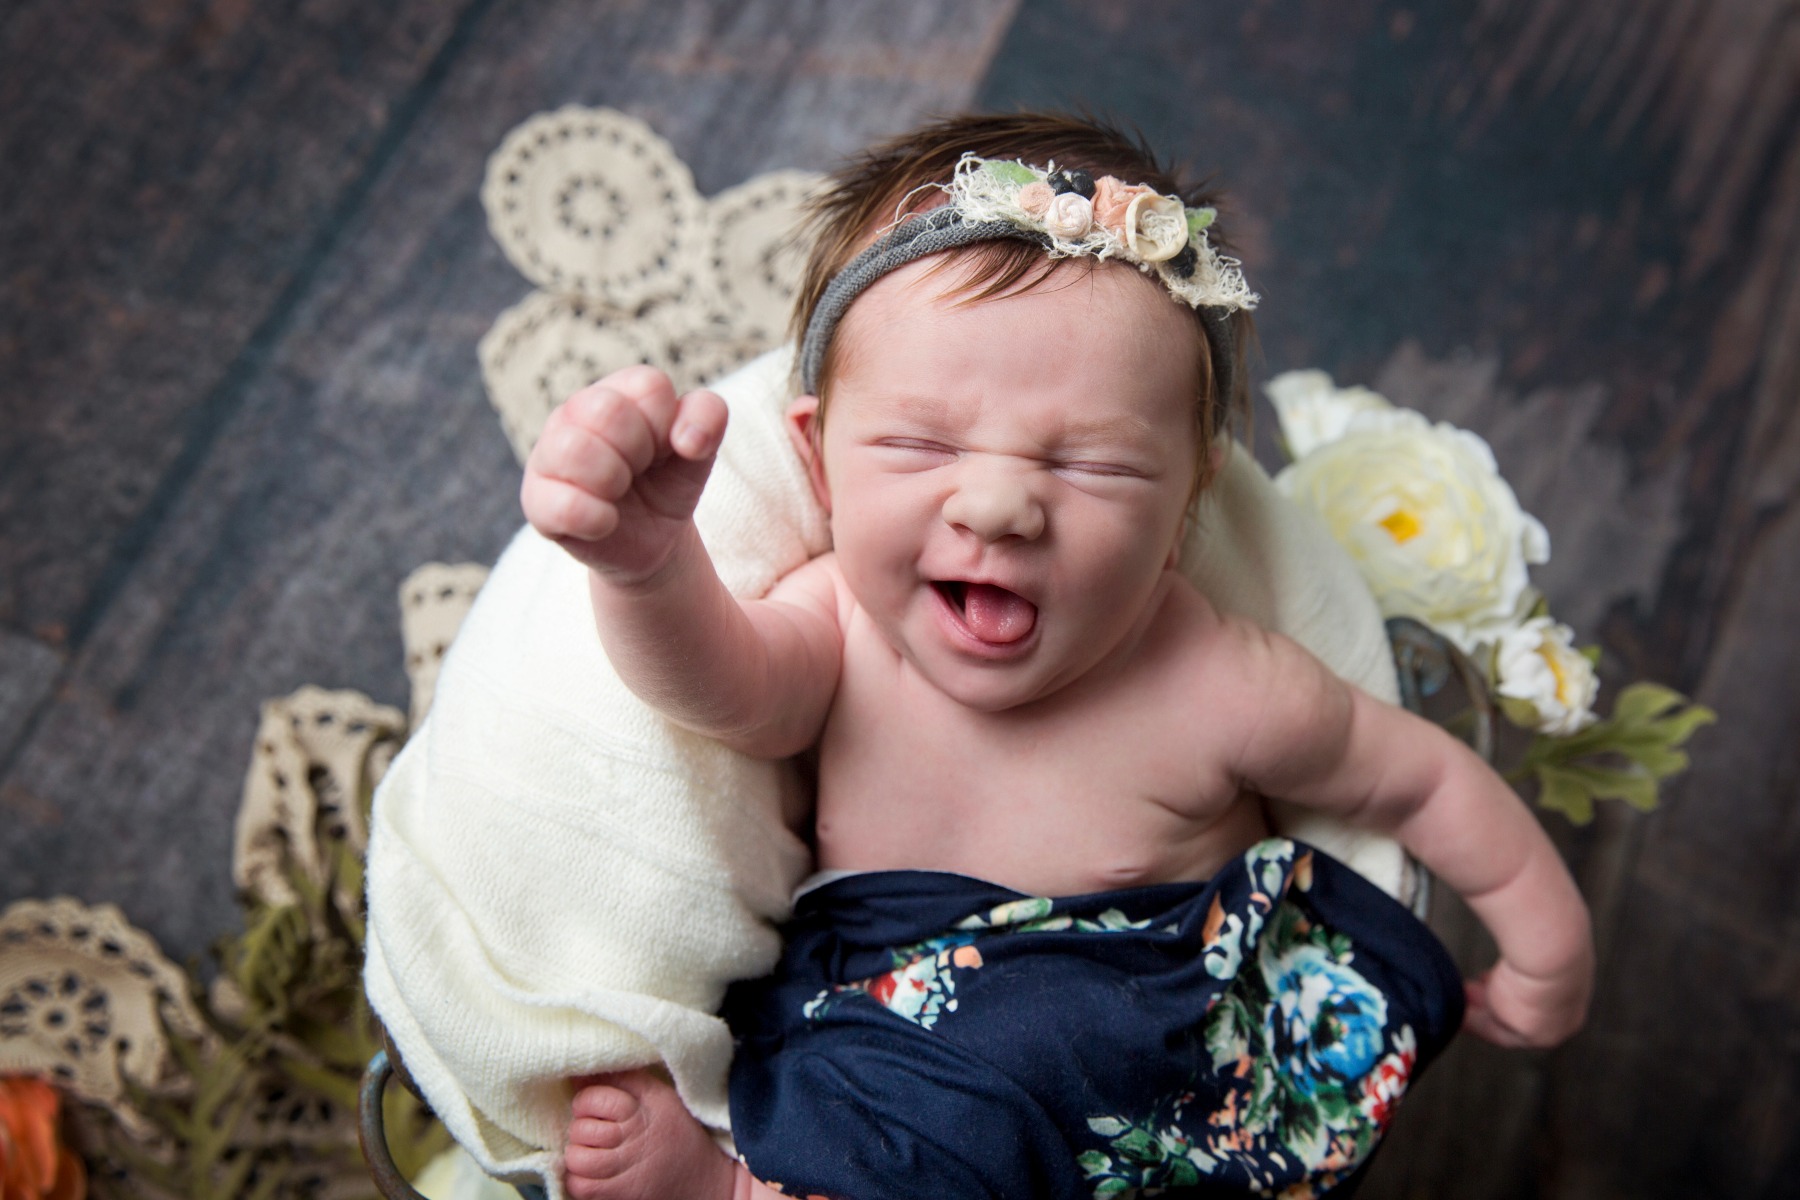 newborn baby appears to be cheering in her sleep